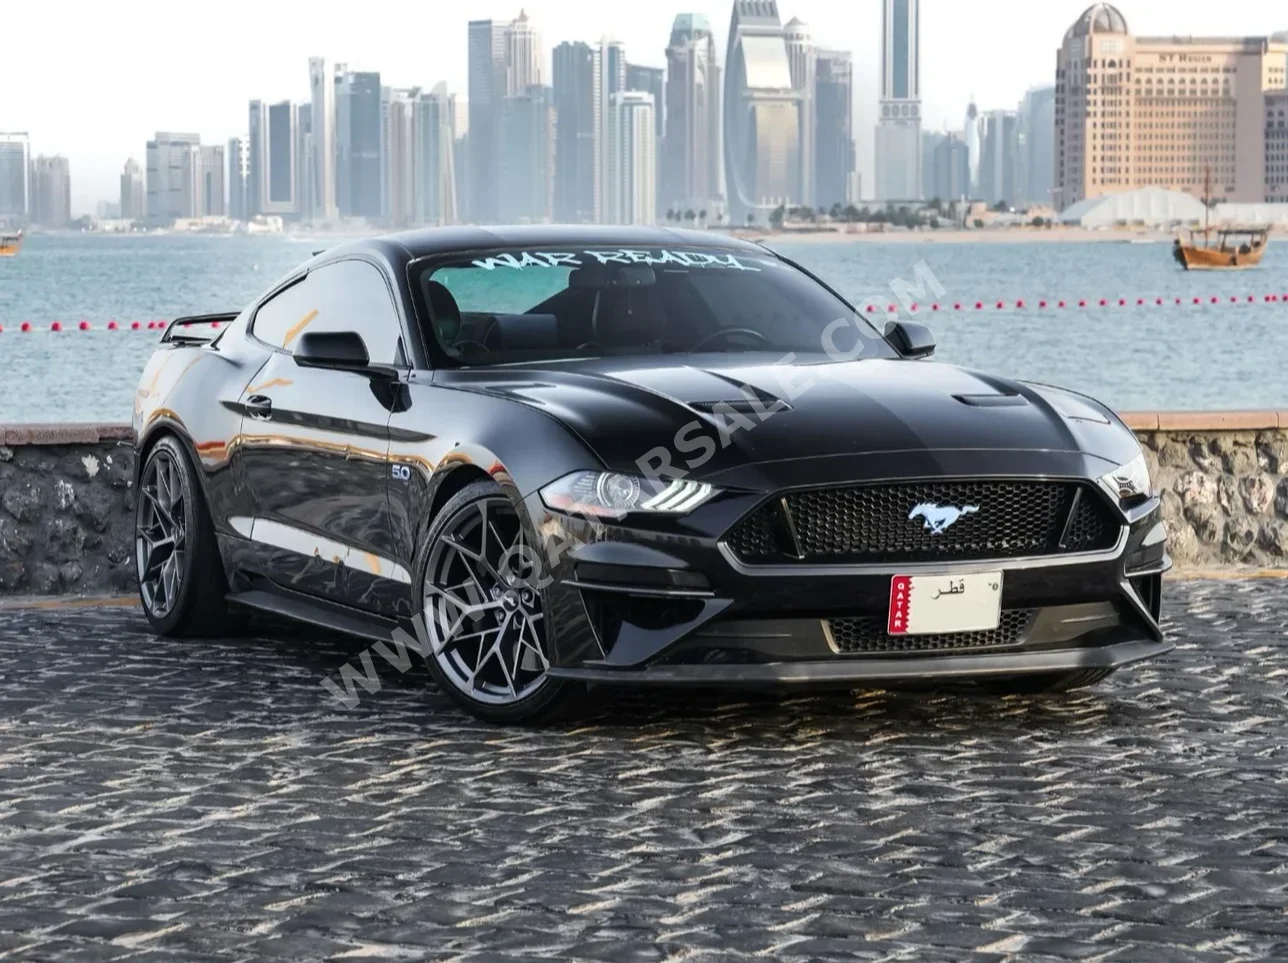 Ford  Mustang  GT  2020  Manual  59,000 Km  8 Cylinder  Rear Wheel Drive (RWD)  Coupe / Sport  Black